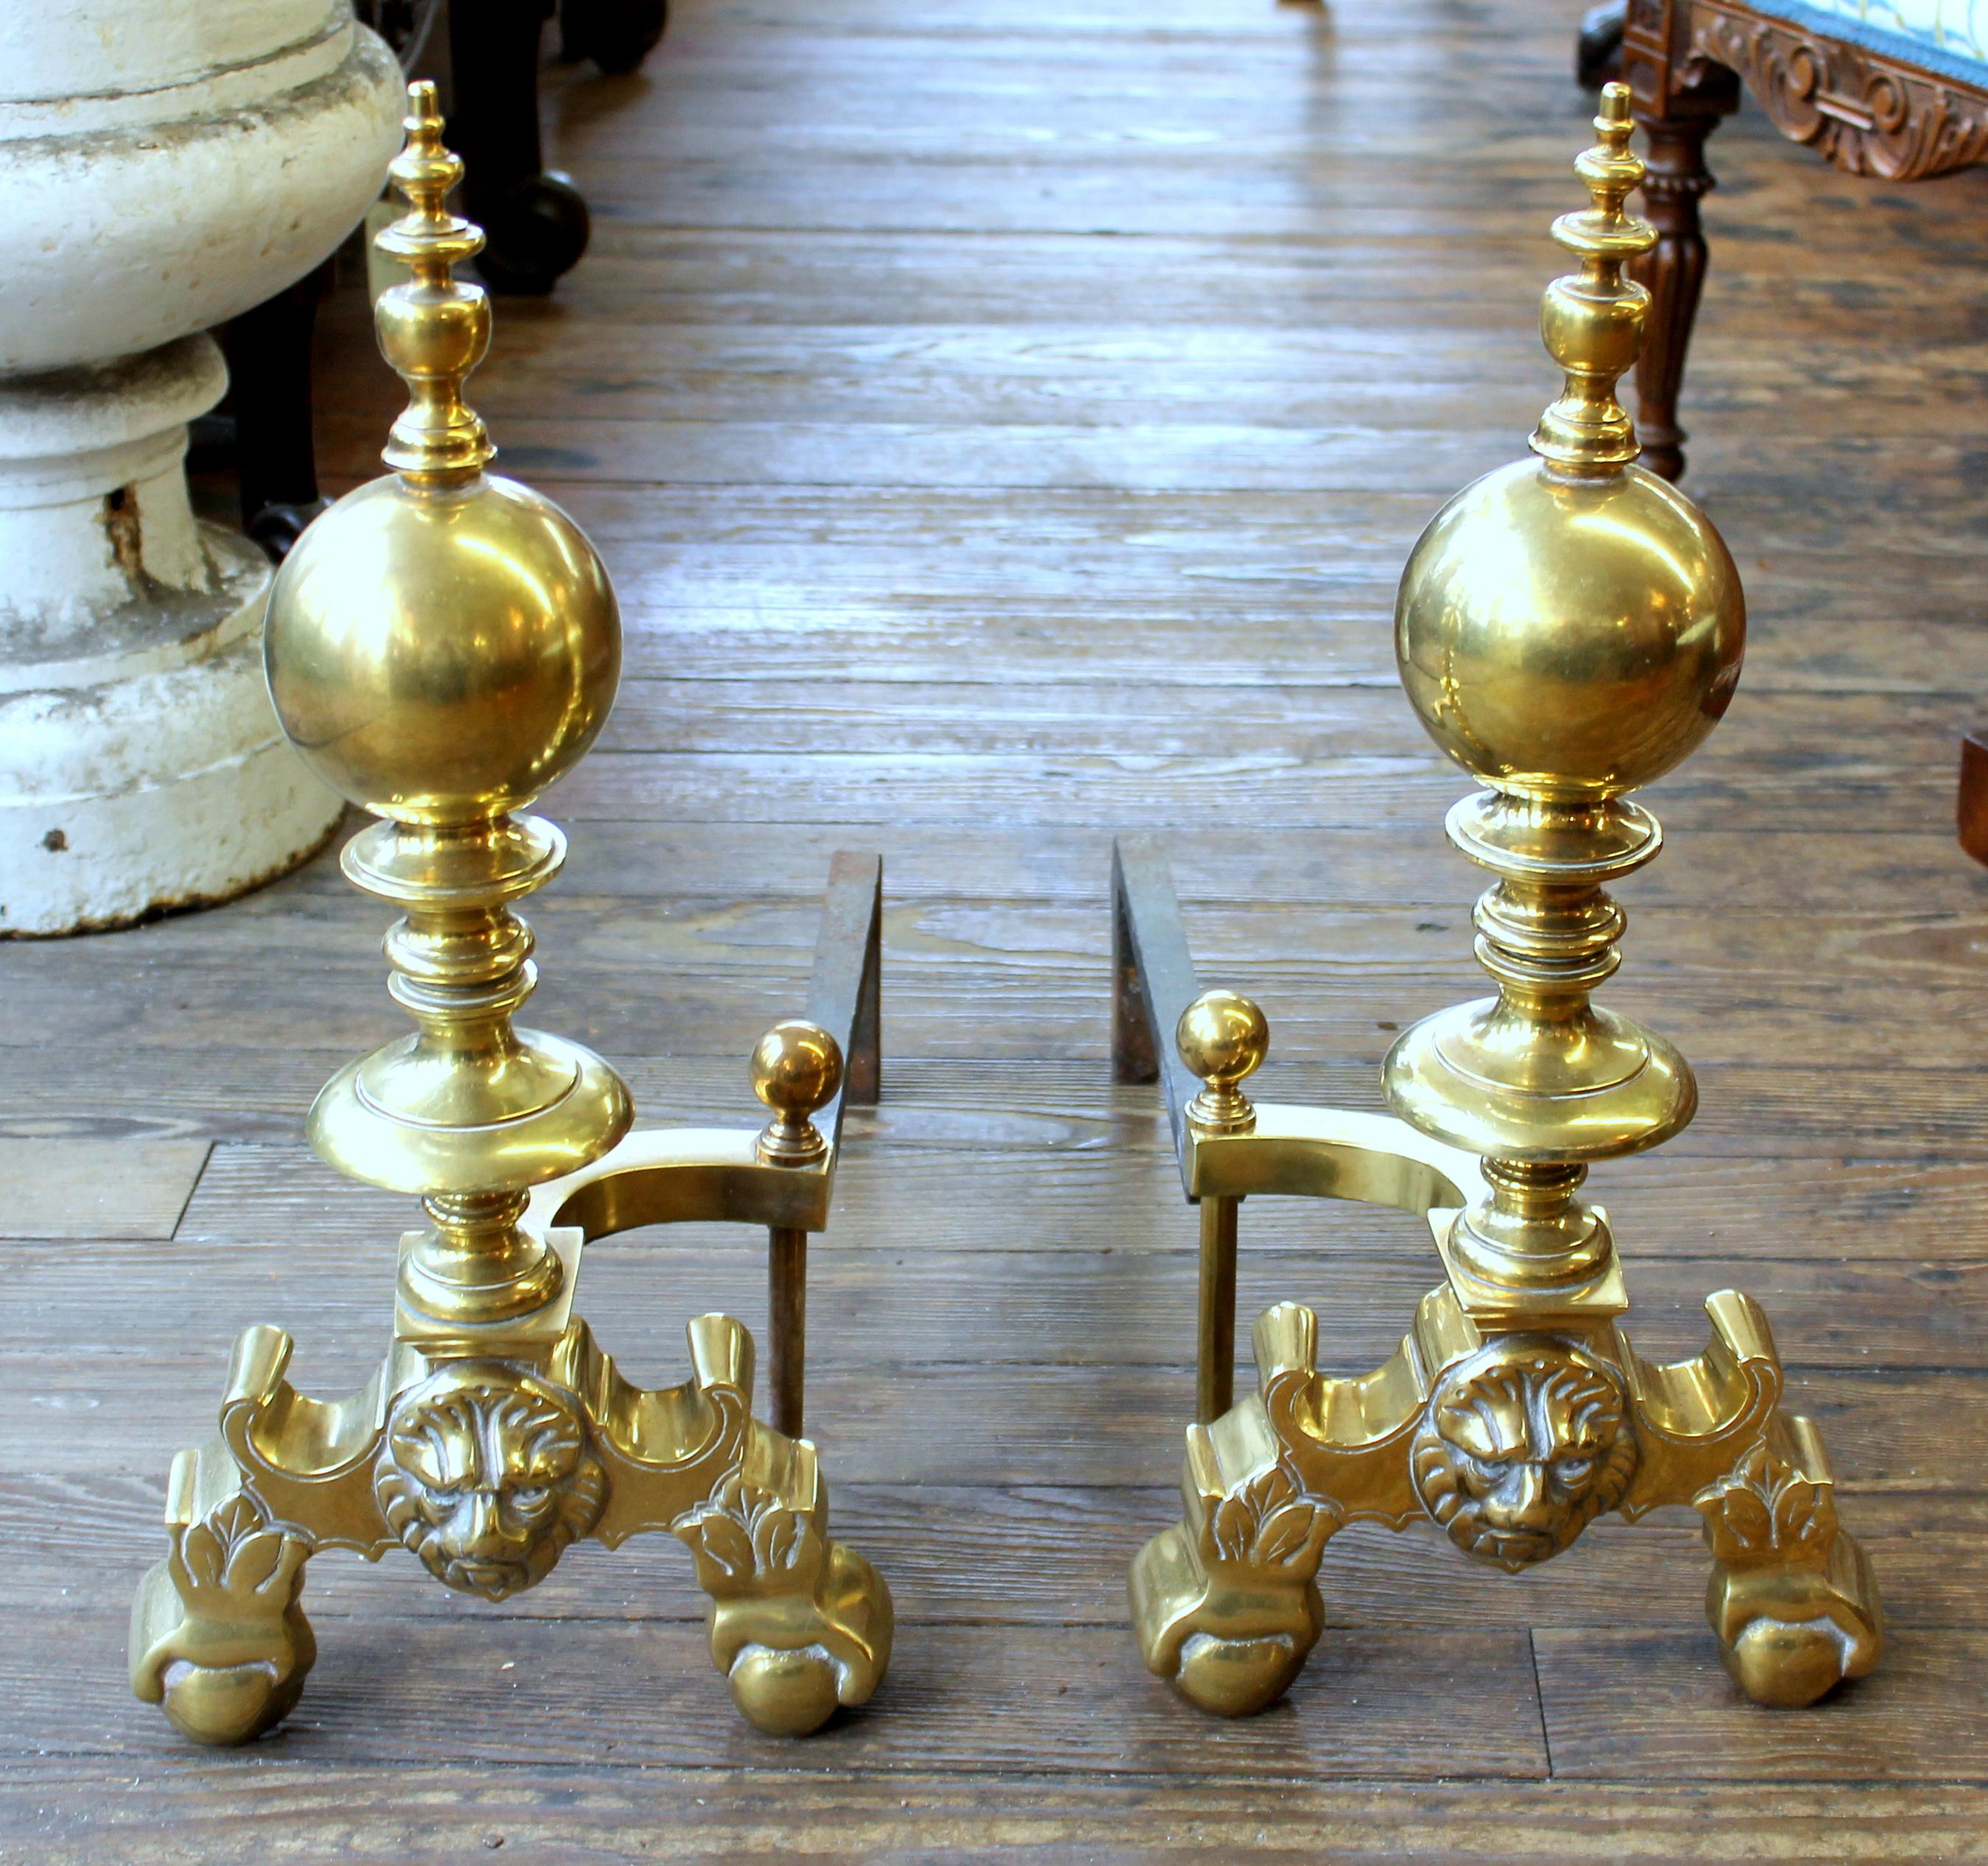 Pair of heavy solid cast brass Federal style continental lion's head andirons with cast iron returns (some wear noted and as illustrated).
   